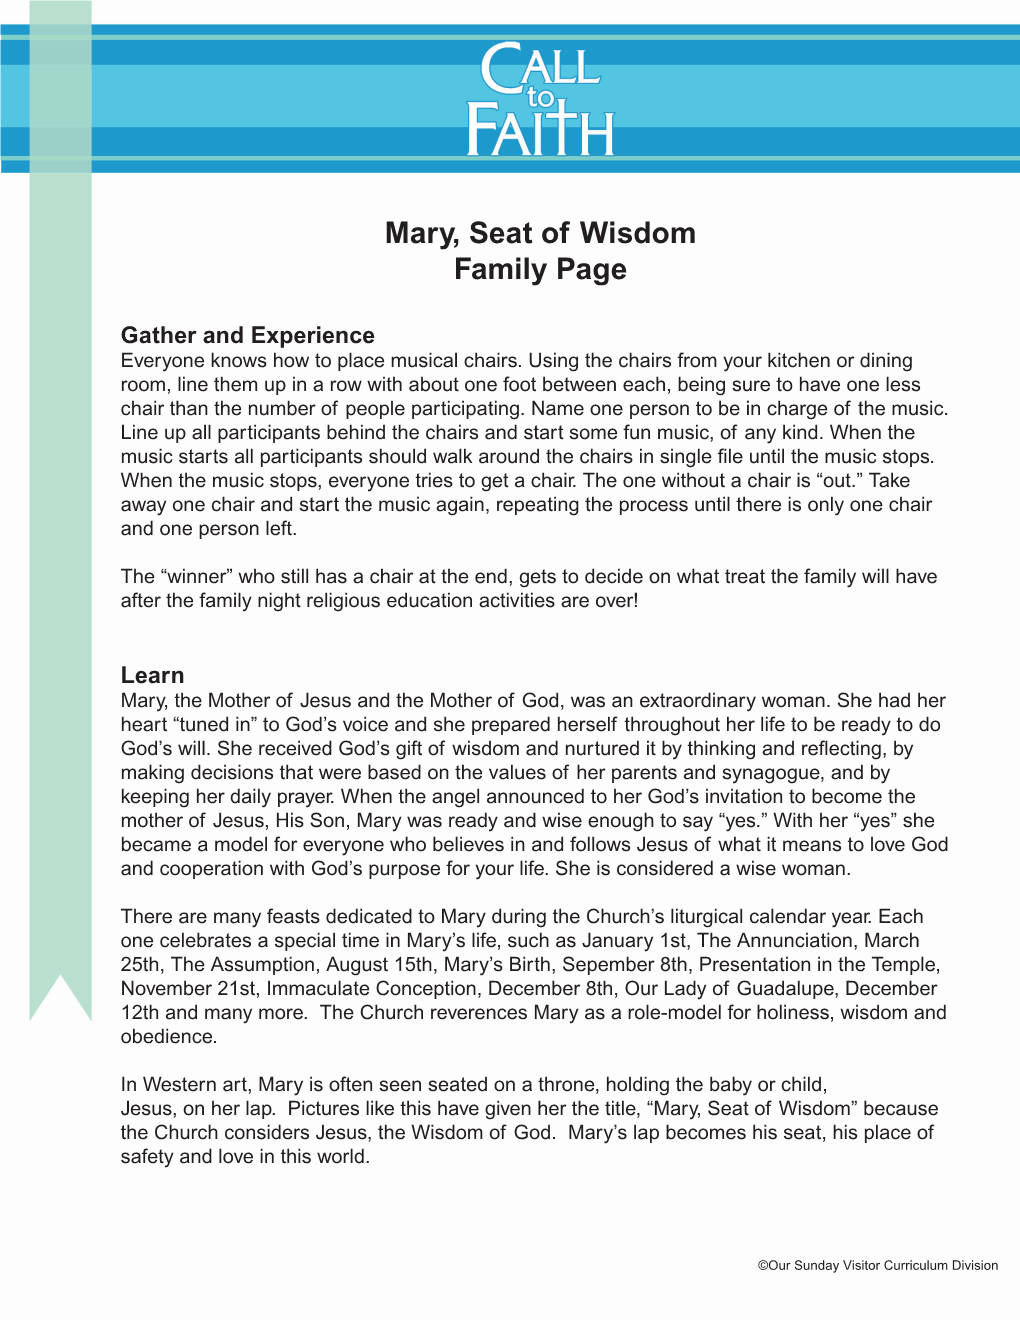 Mary, Seat of Wisdom Family Page